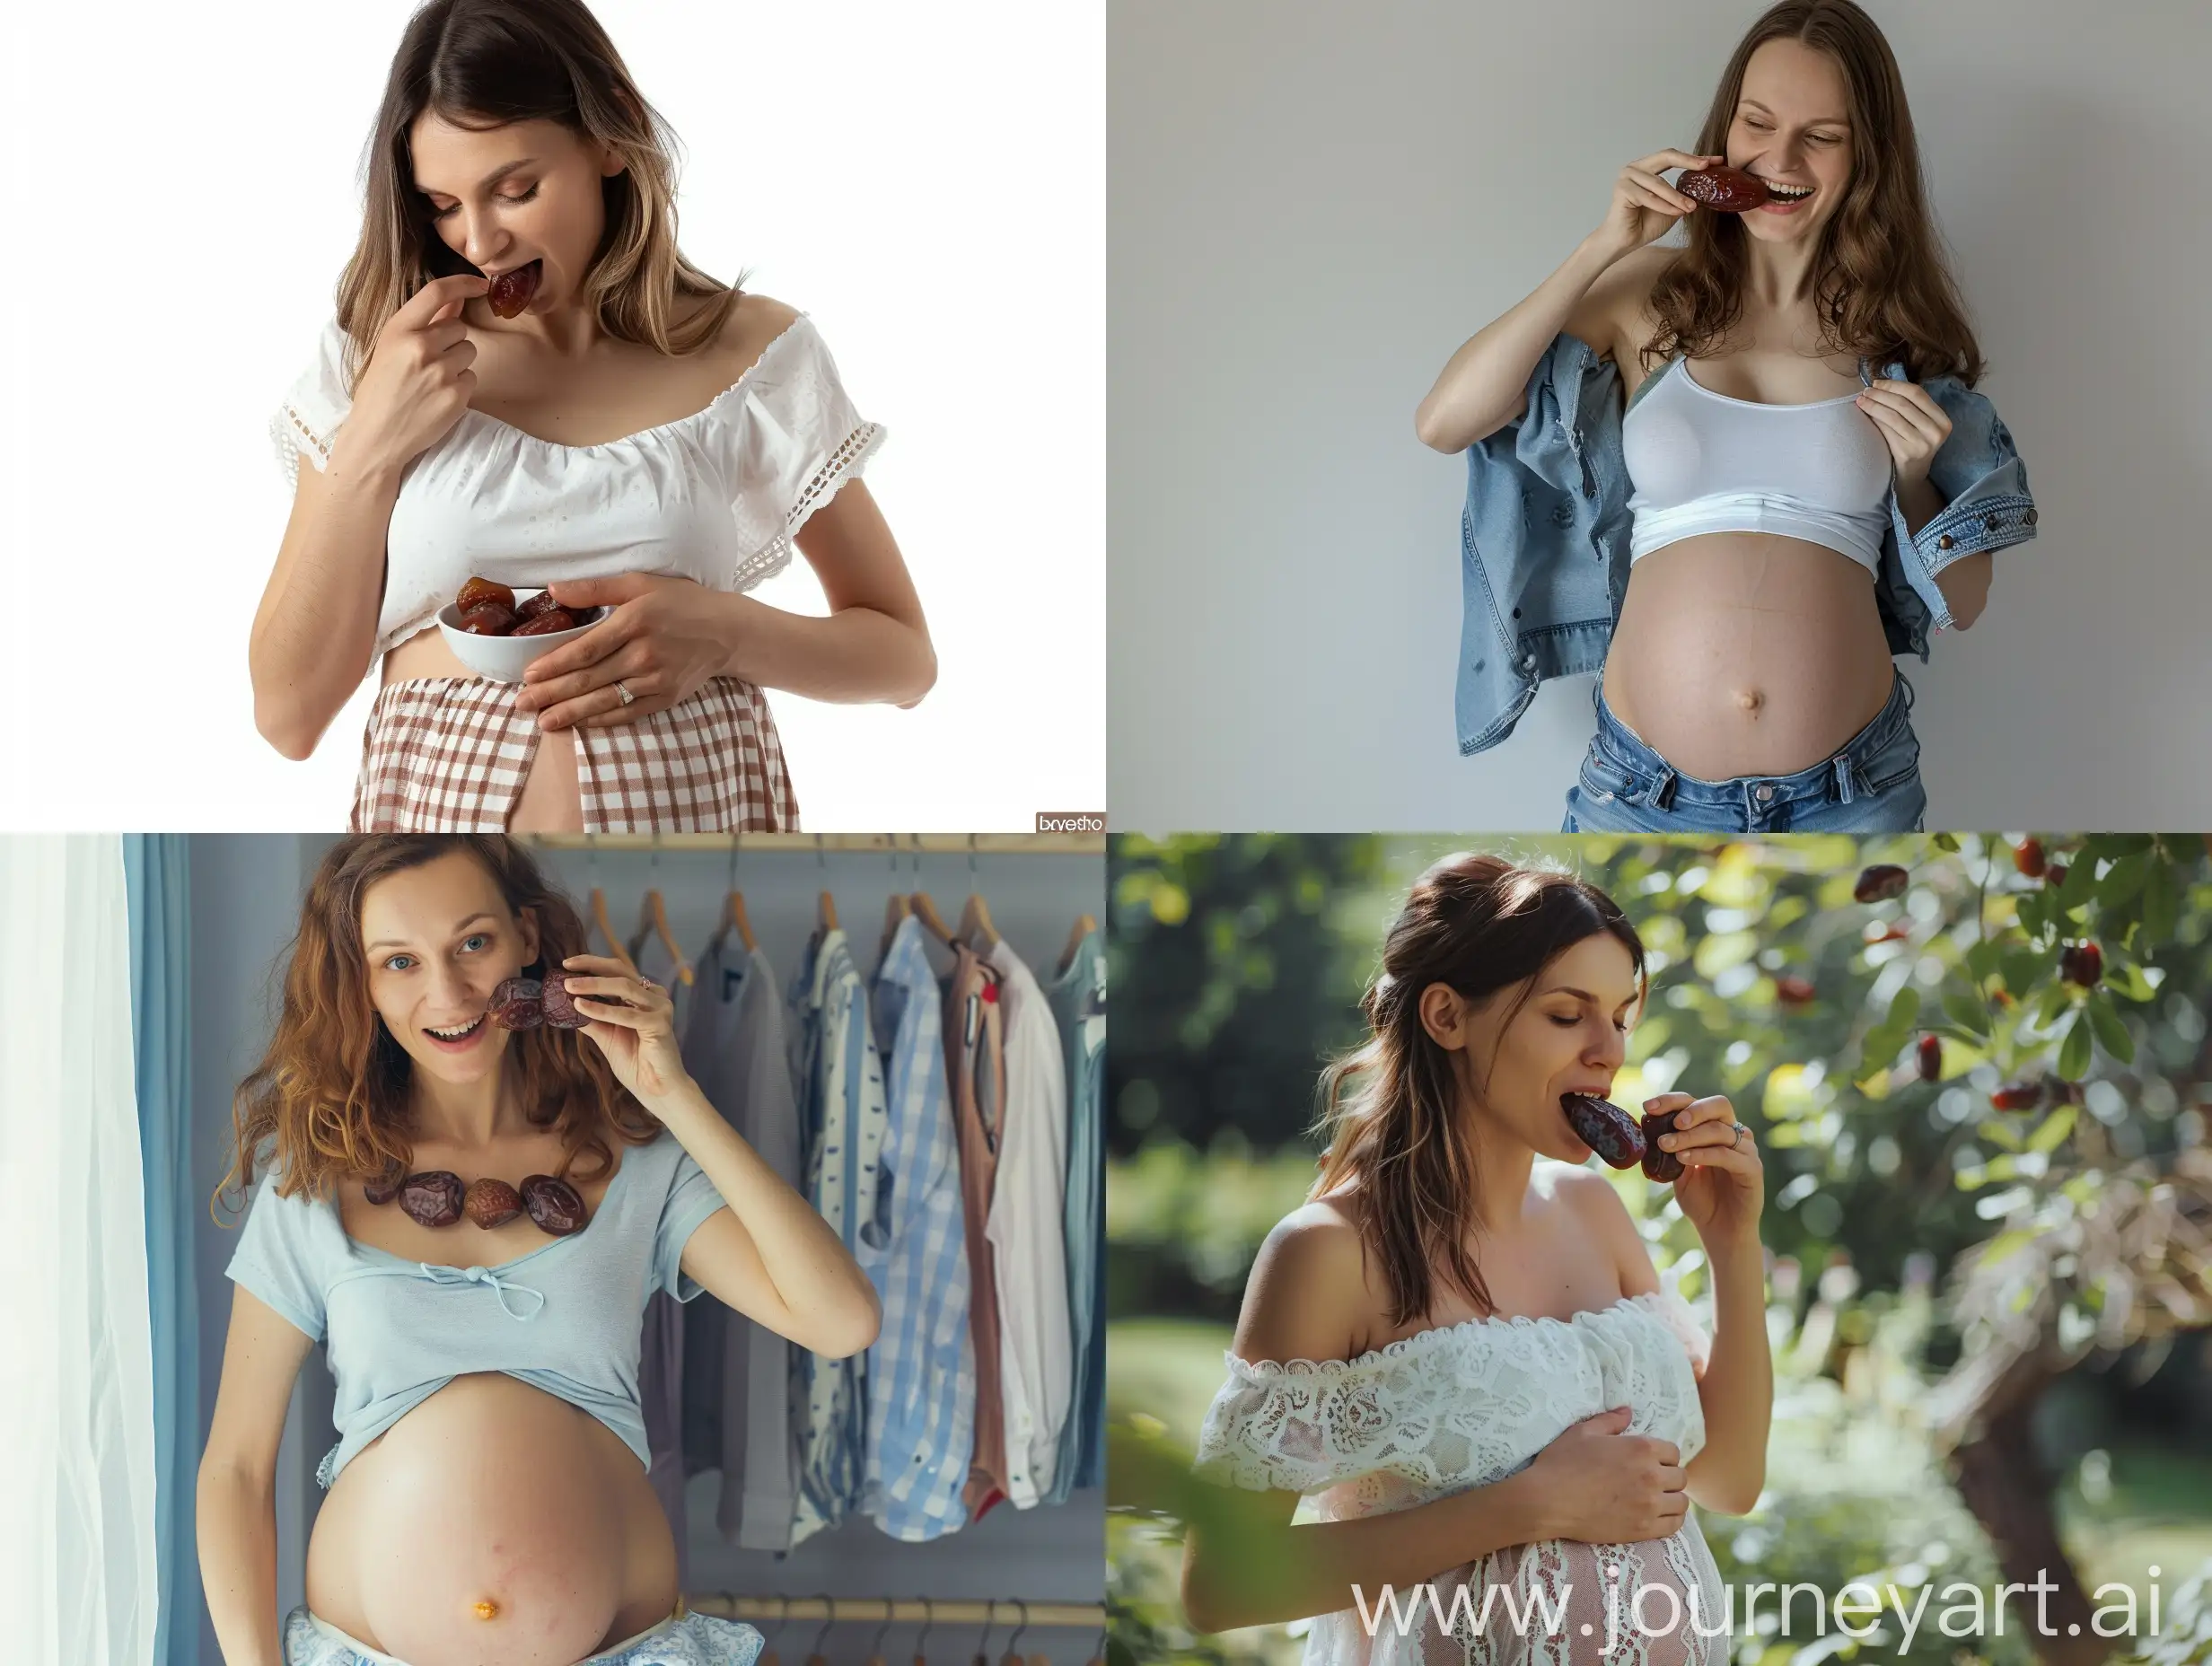 Pregnant woman eating dates in clothes